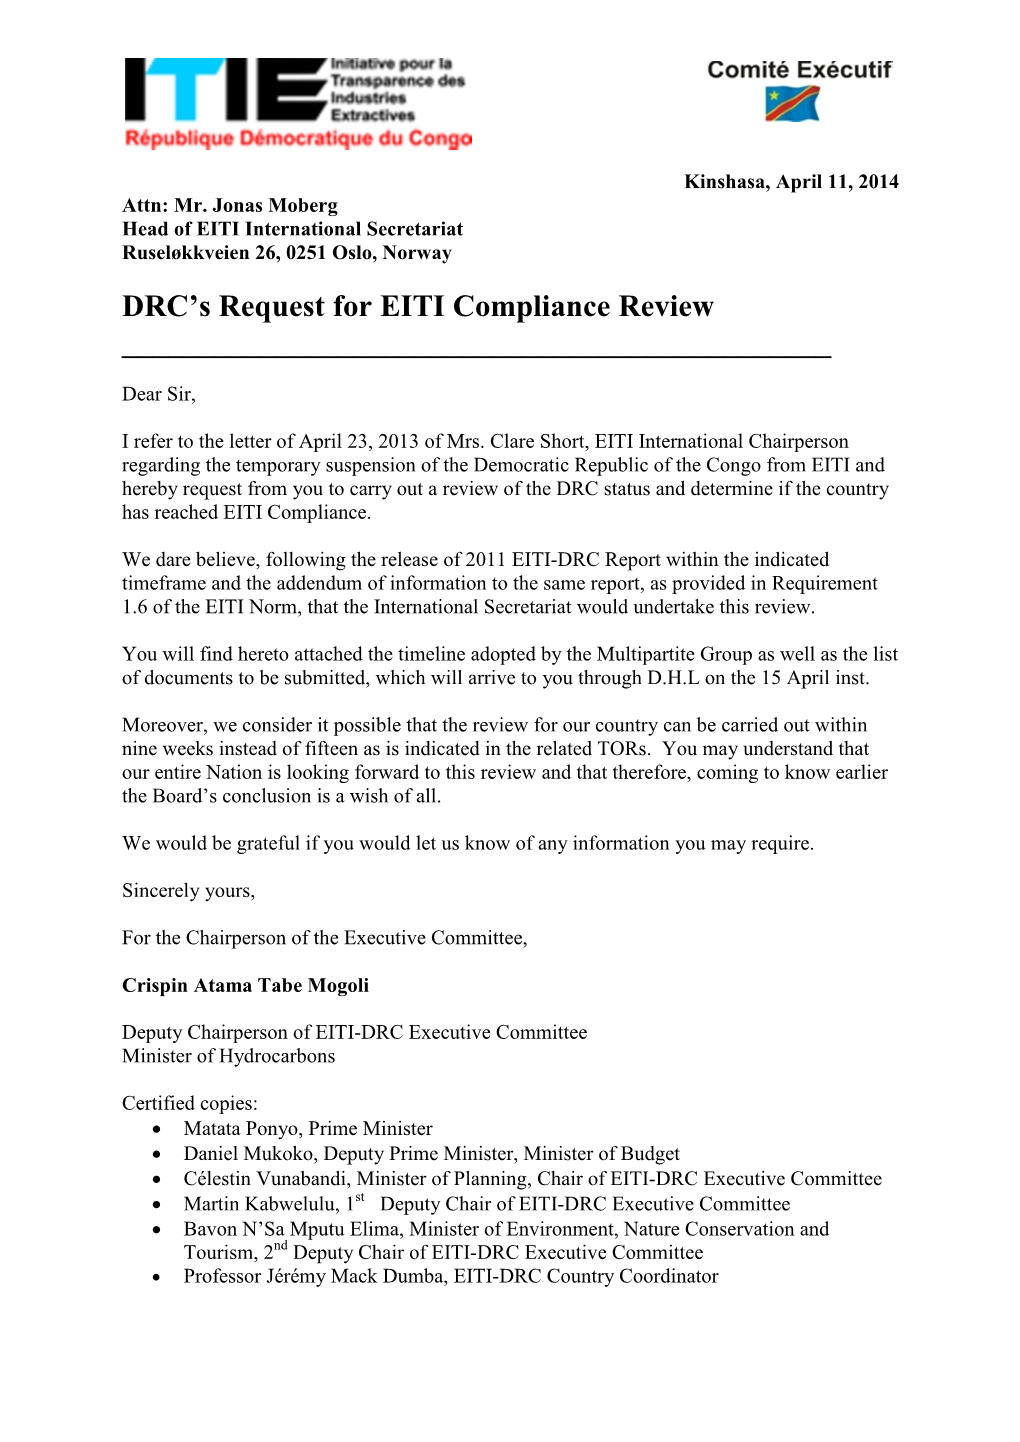 DRC's Request for EITI Compliance Review